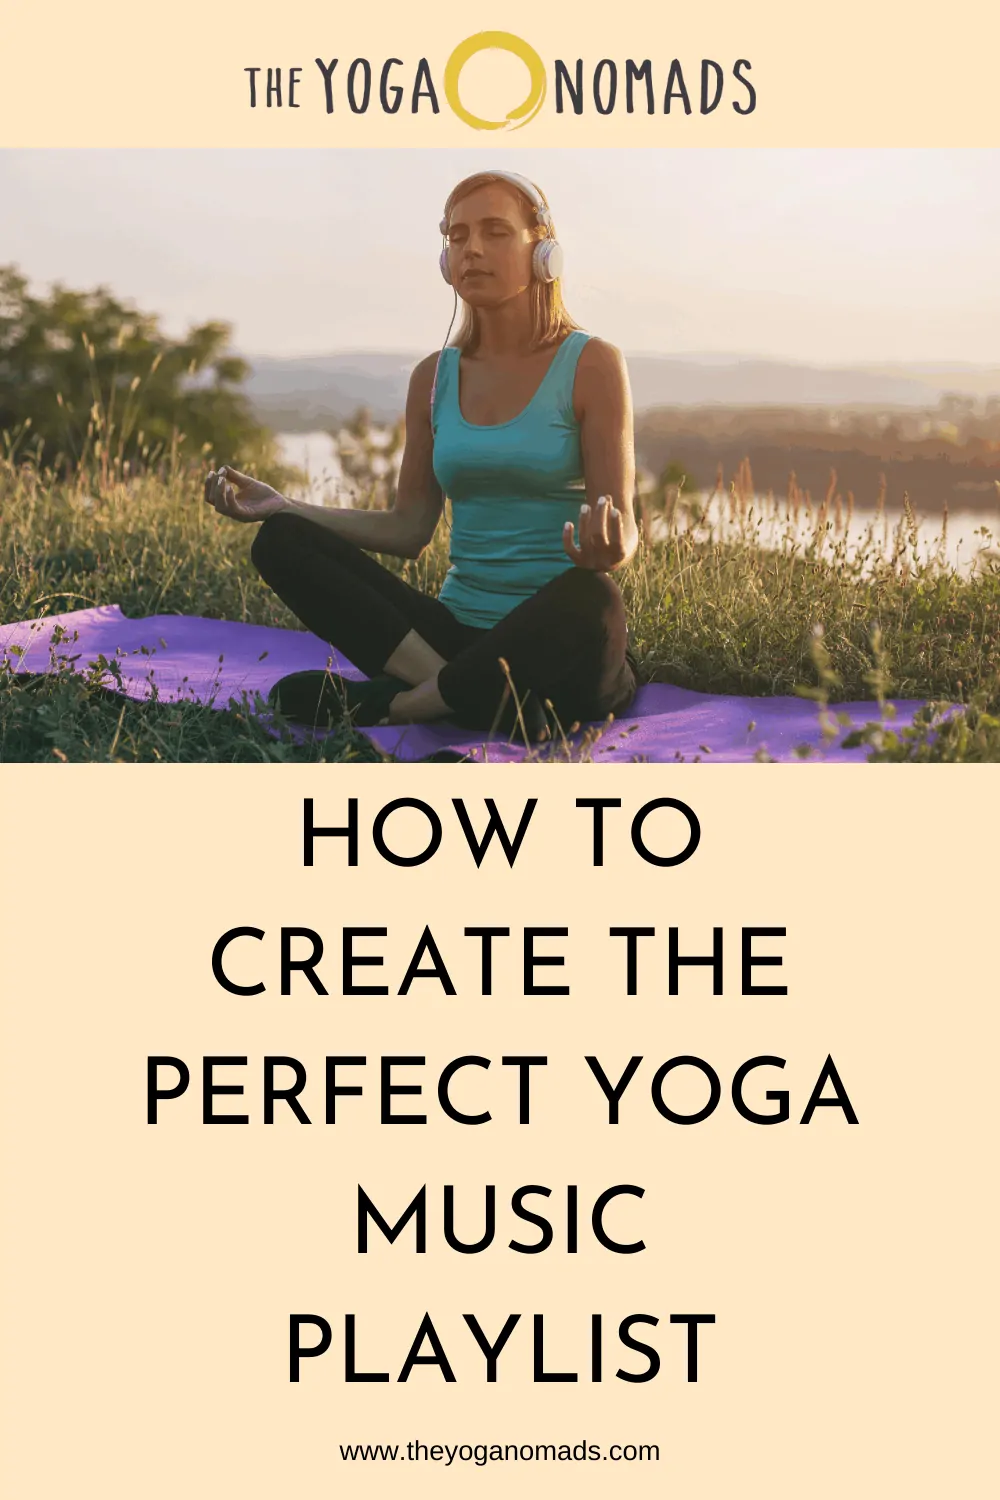 How to Create the Perfect Yoga Music Playlist